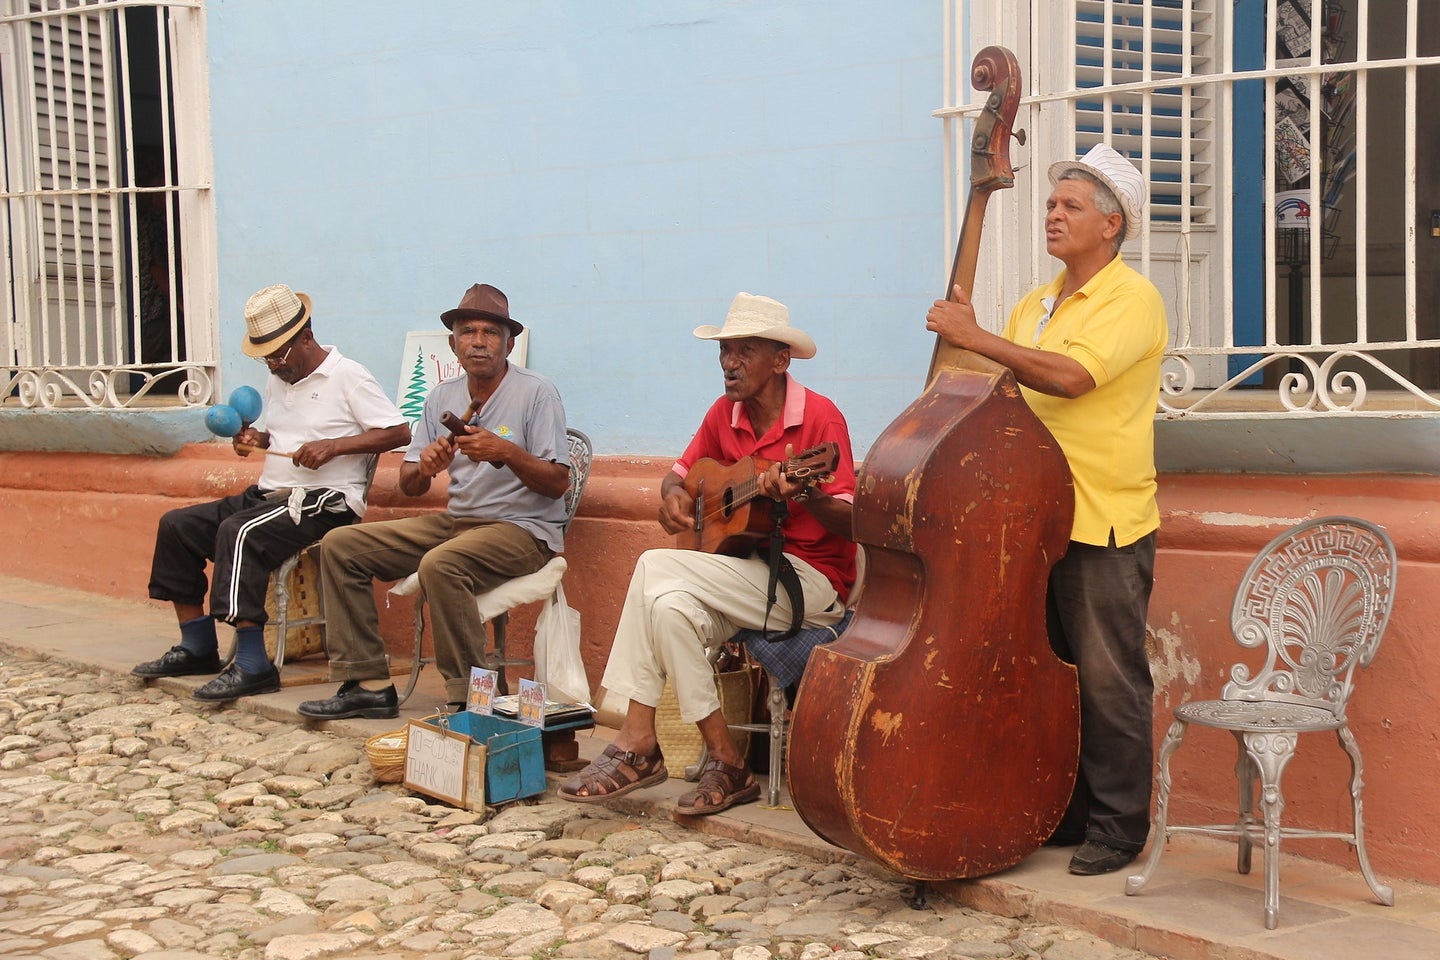 A salsa band on the street.